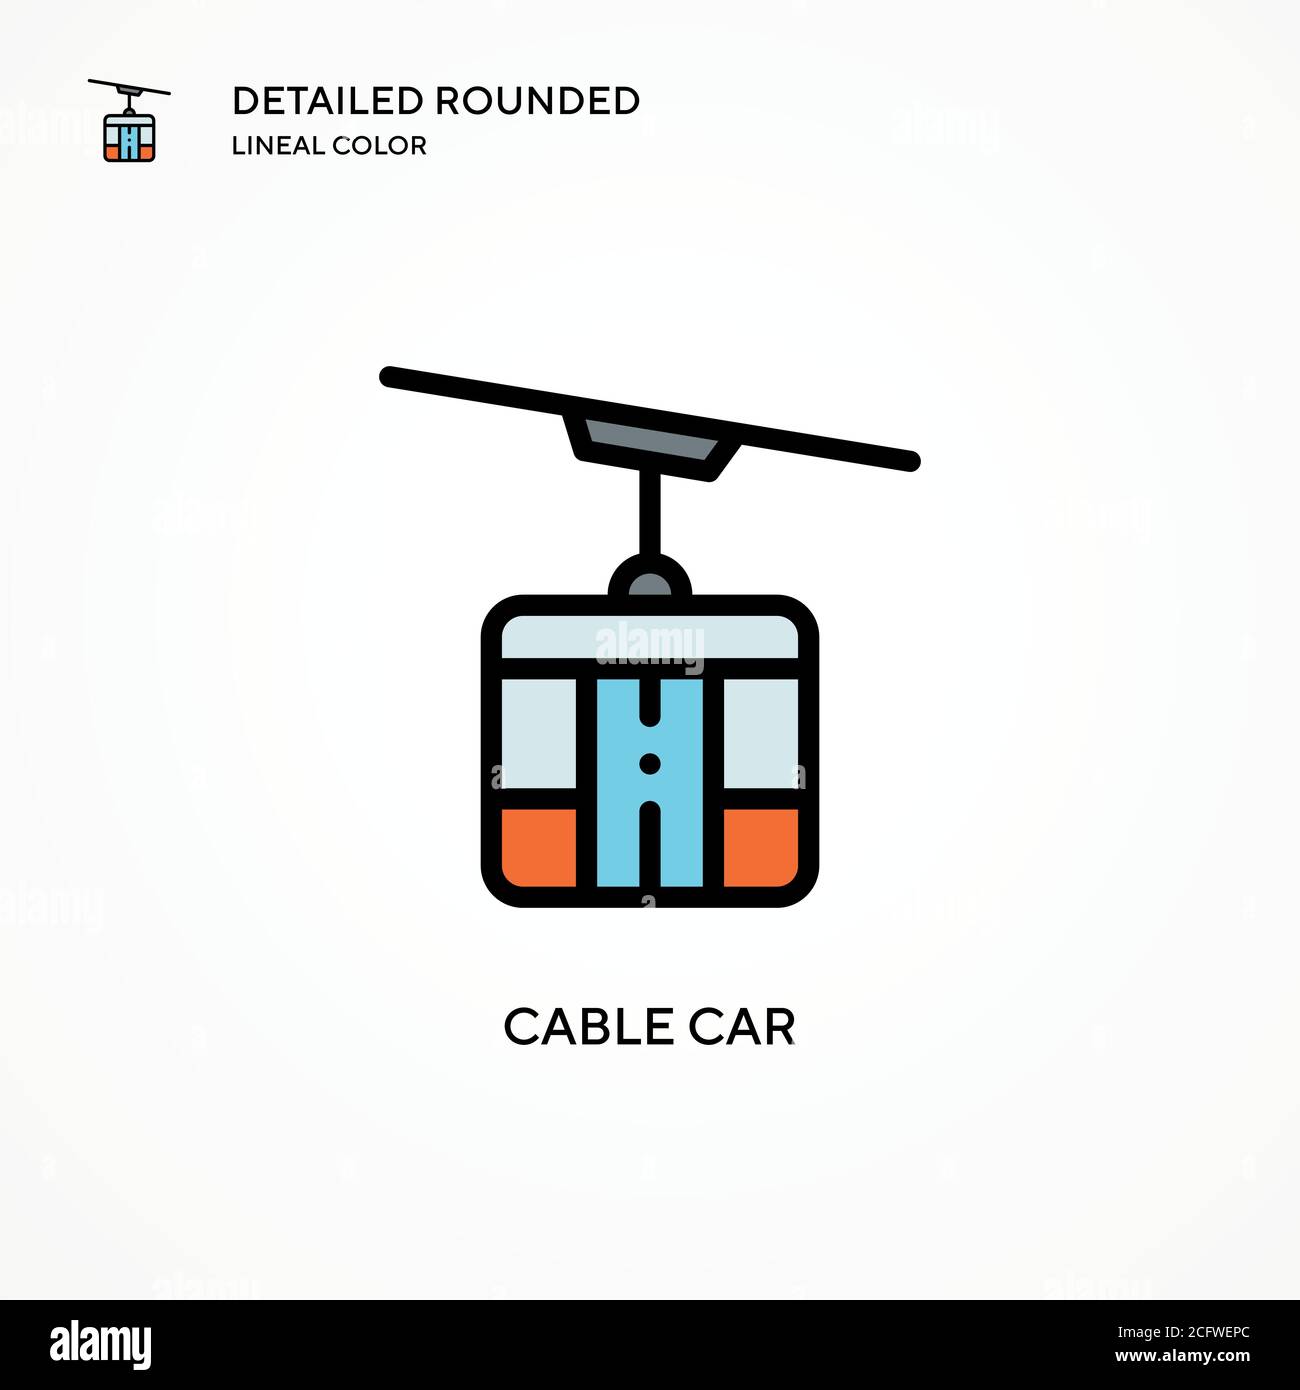 Cable car vector icon. Modern vector illustration concepts. Easy to edit and customize. Stock Vector